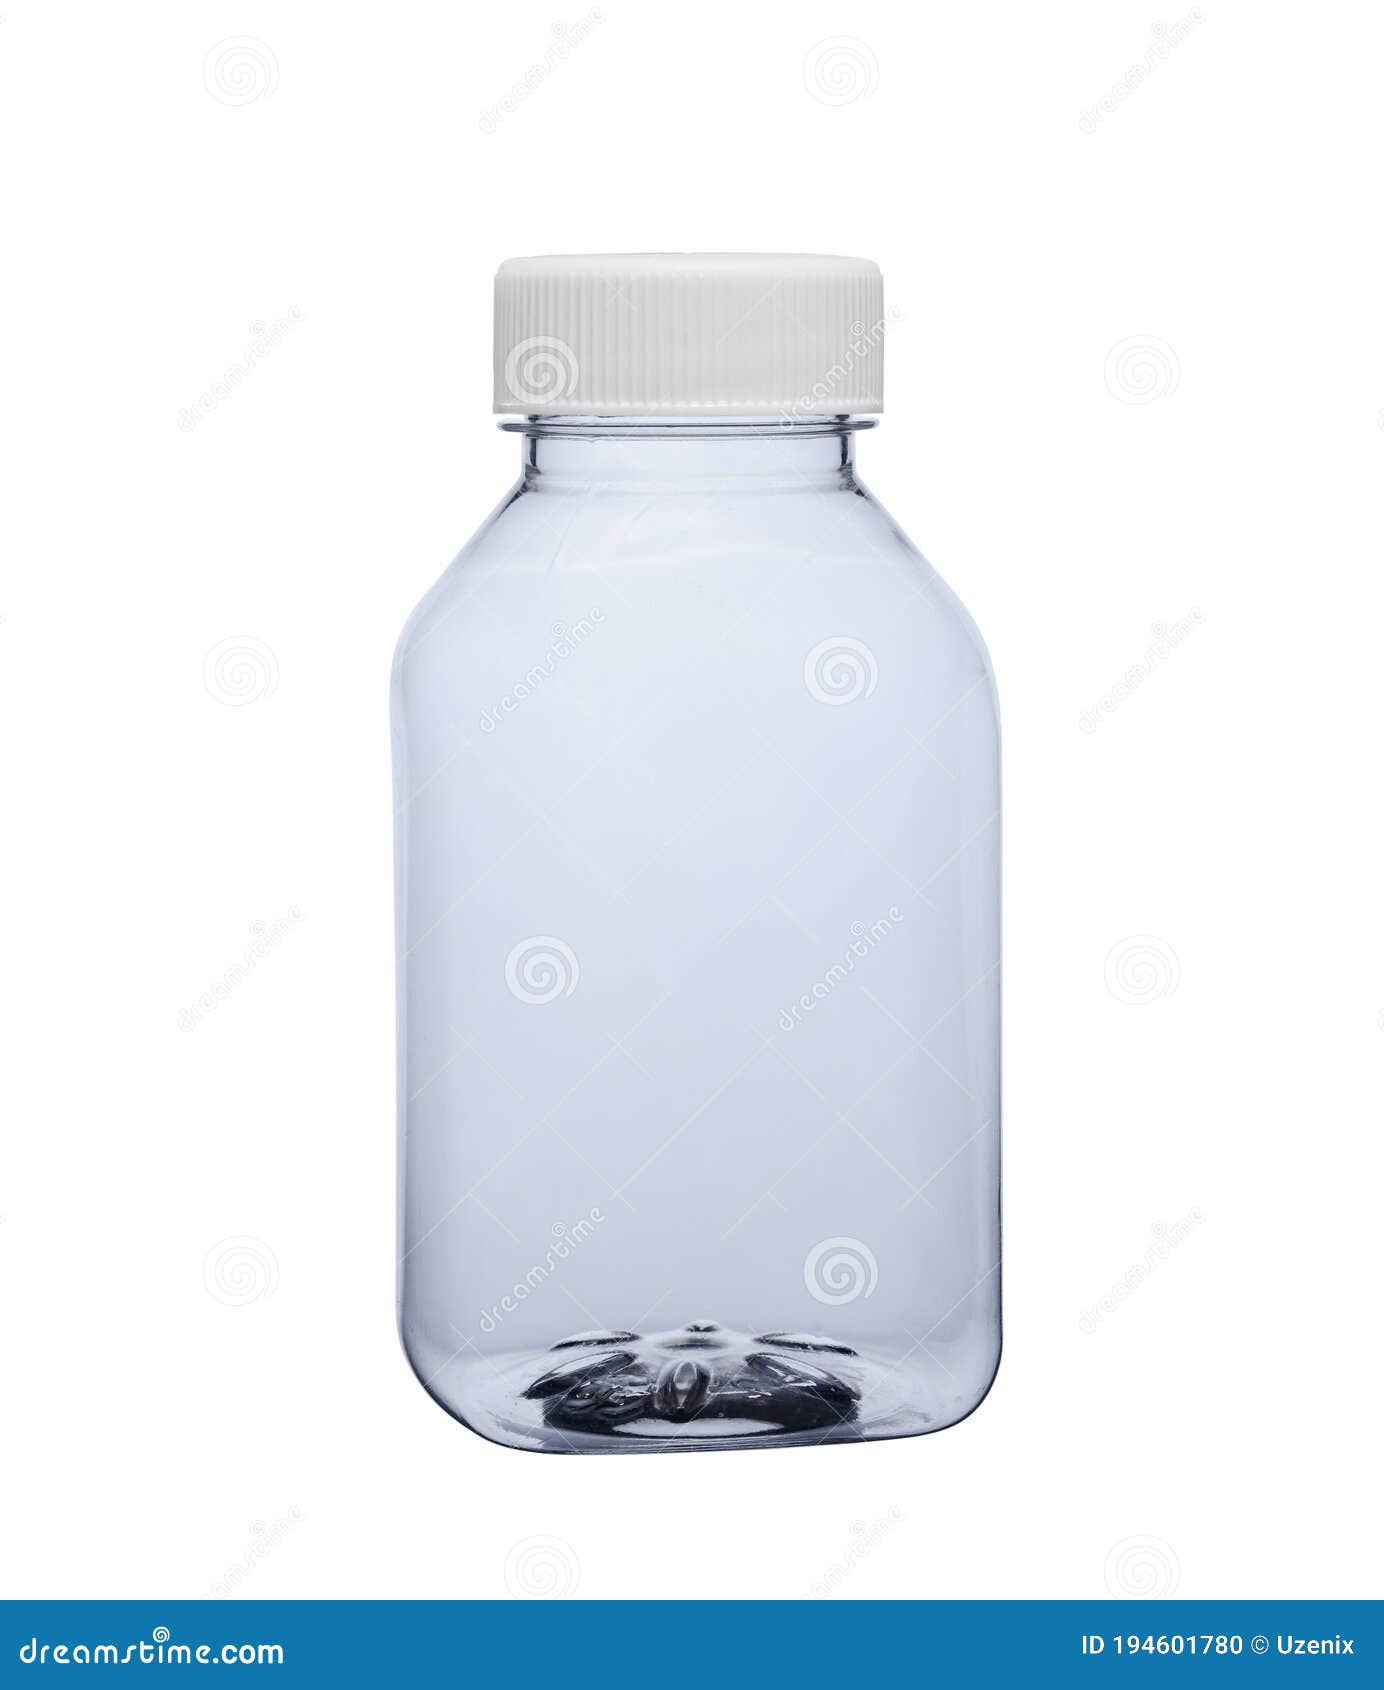 Download 10 339 Empty Transparent Plastic Bottle Photos Free Royalty Free Stock Photos From Dreamstime Yellowimages Mockups